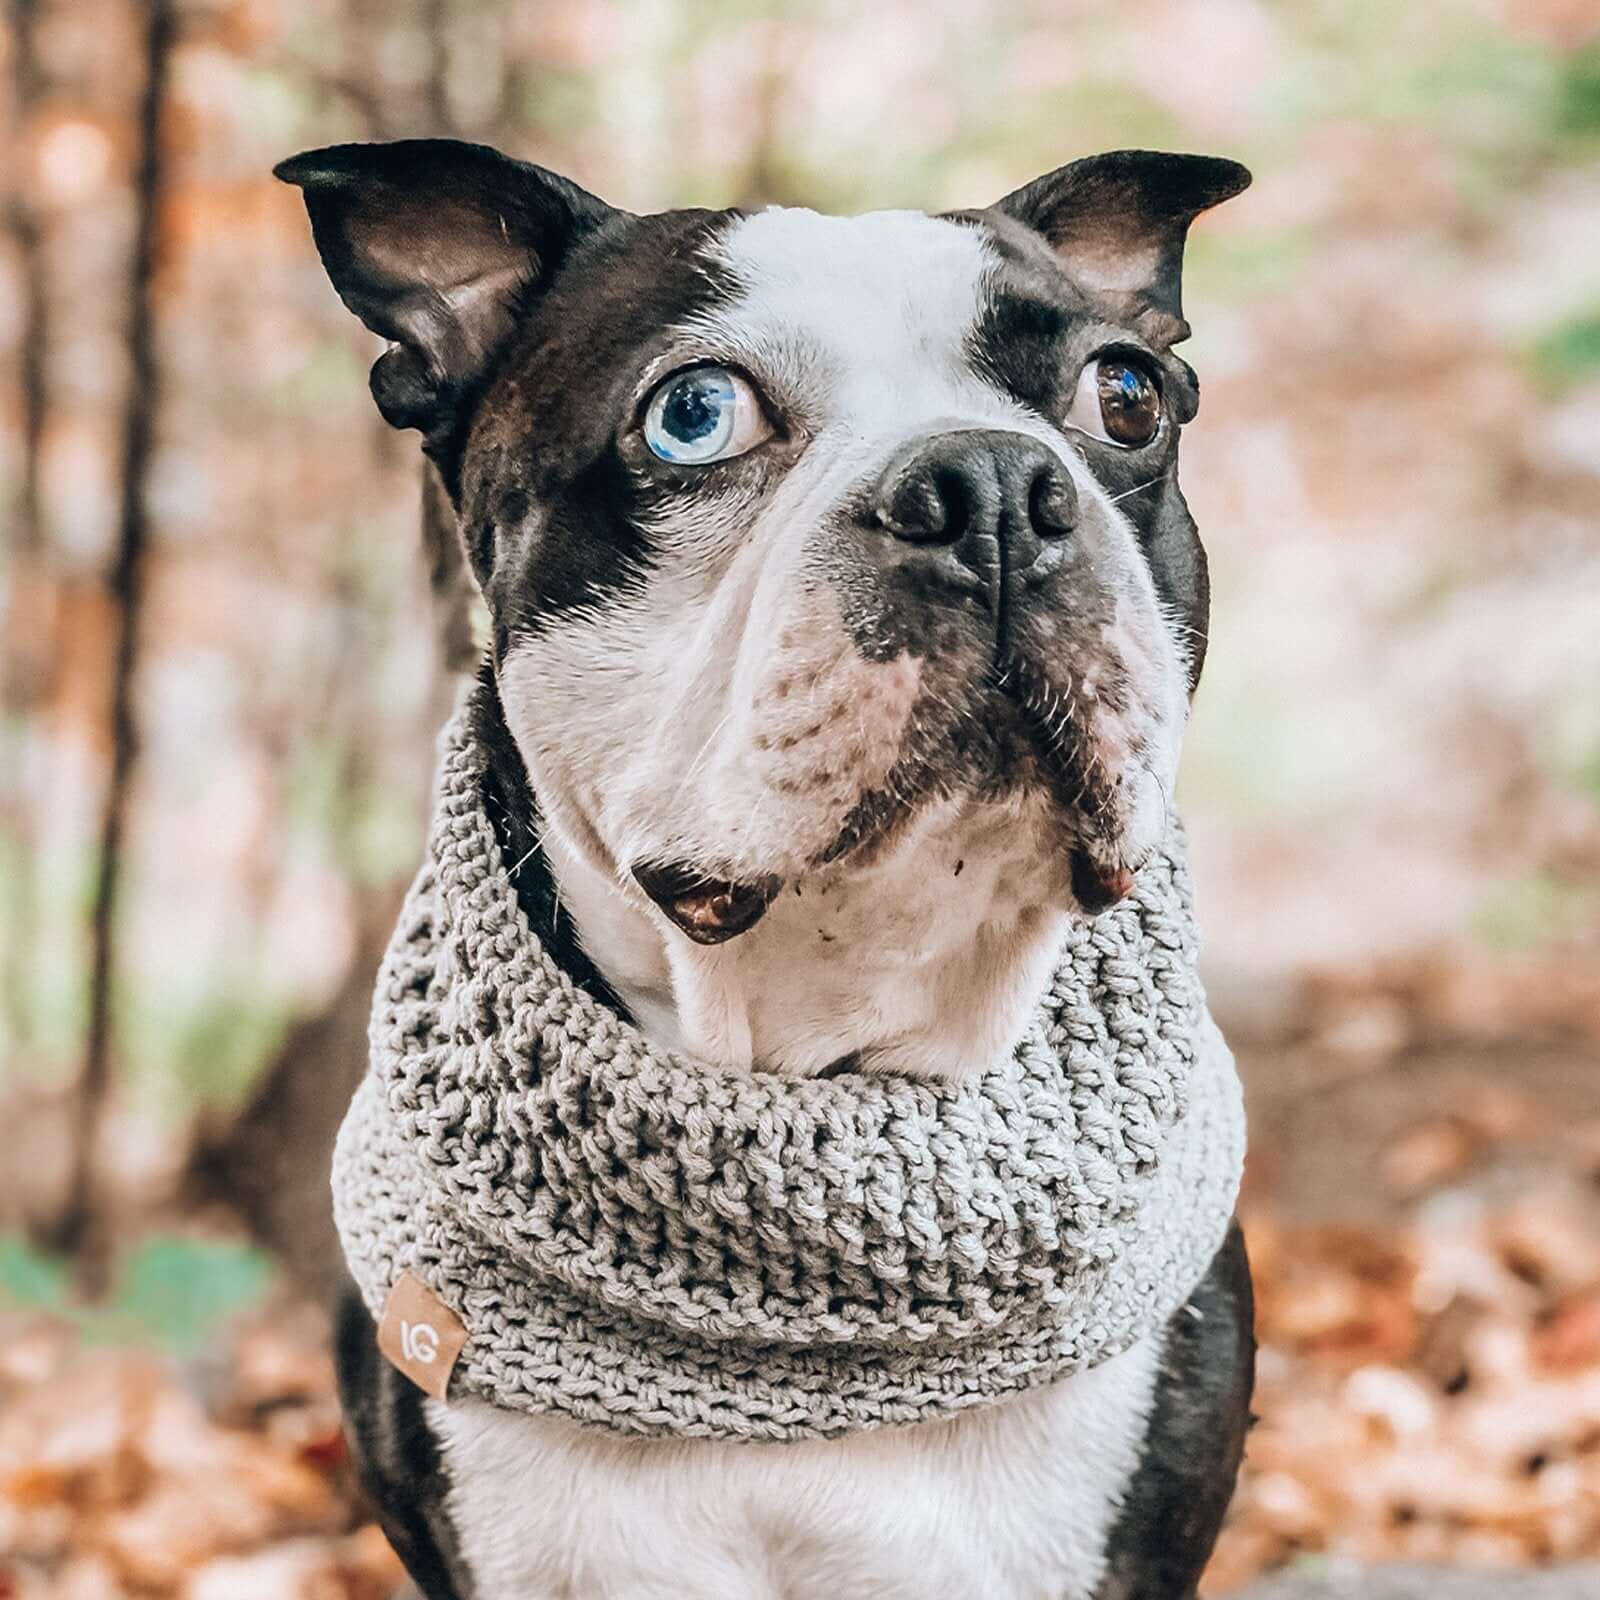 Pepper grey luxury handcrafted dog snood